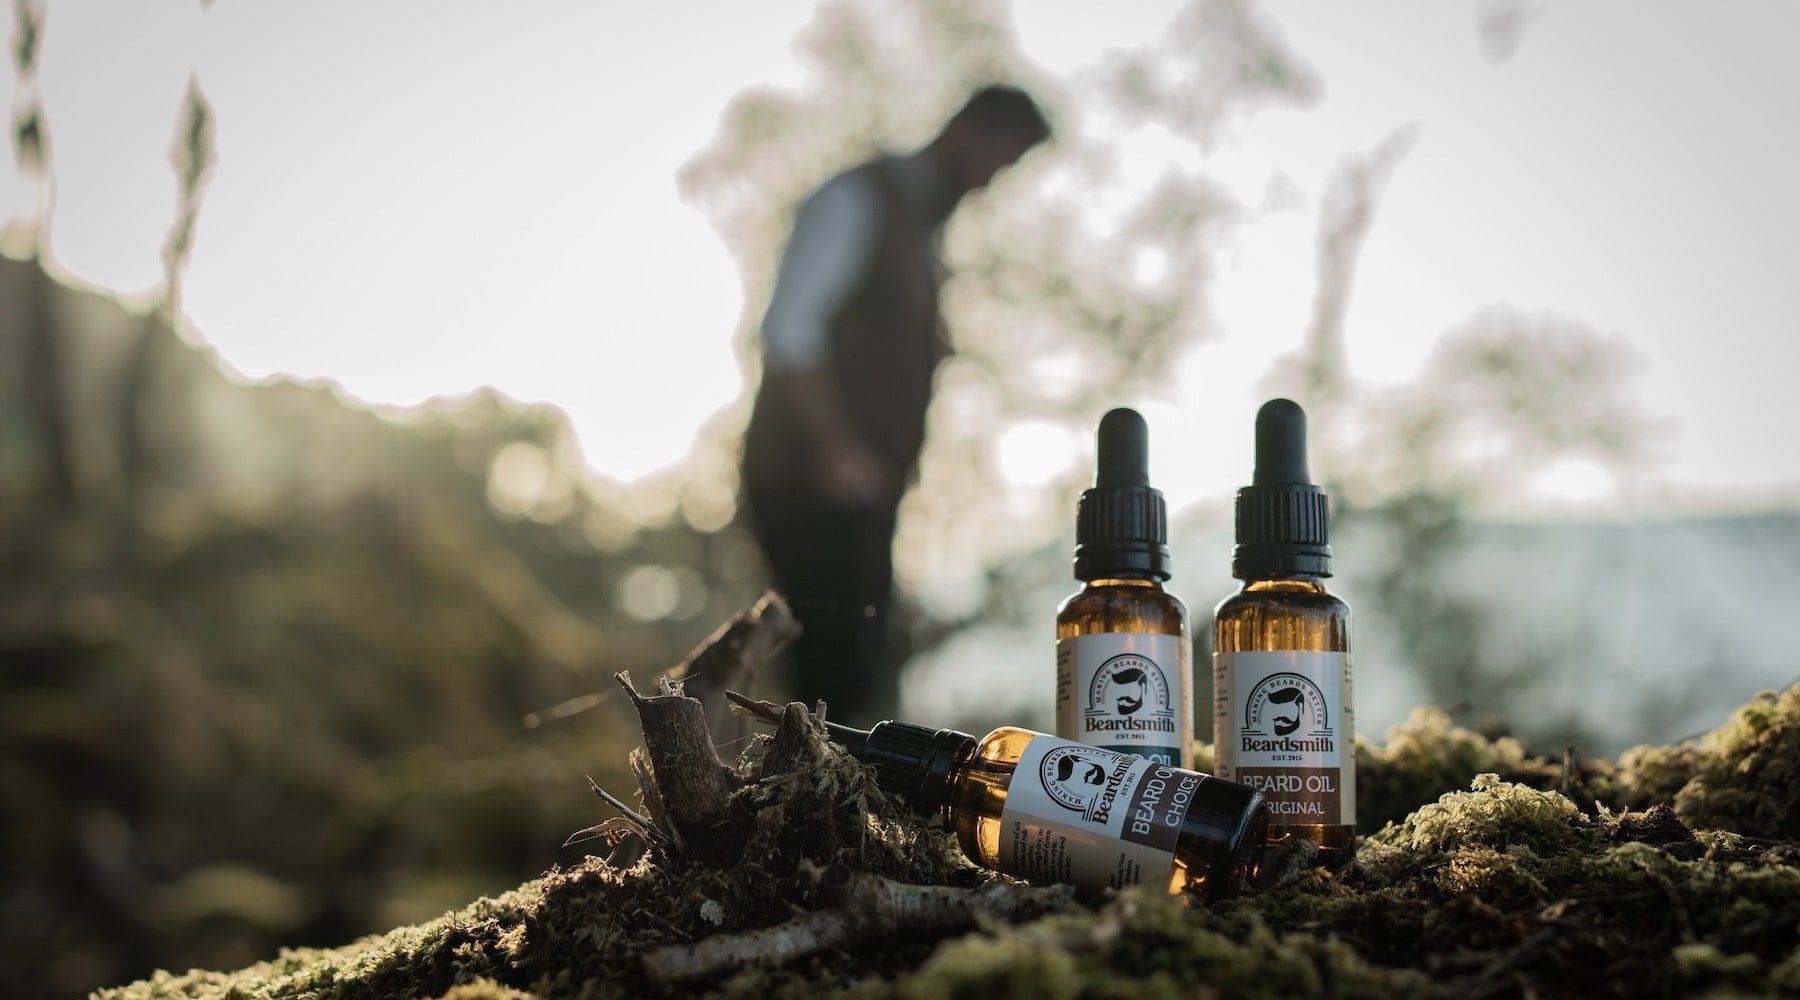 3 bottles of beard oil on a log in a forest with a bearded guys silhouette in the background